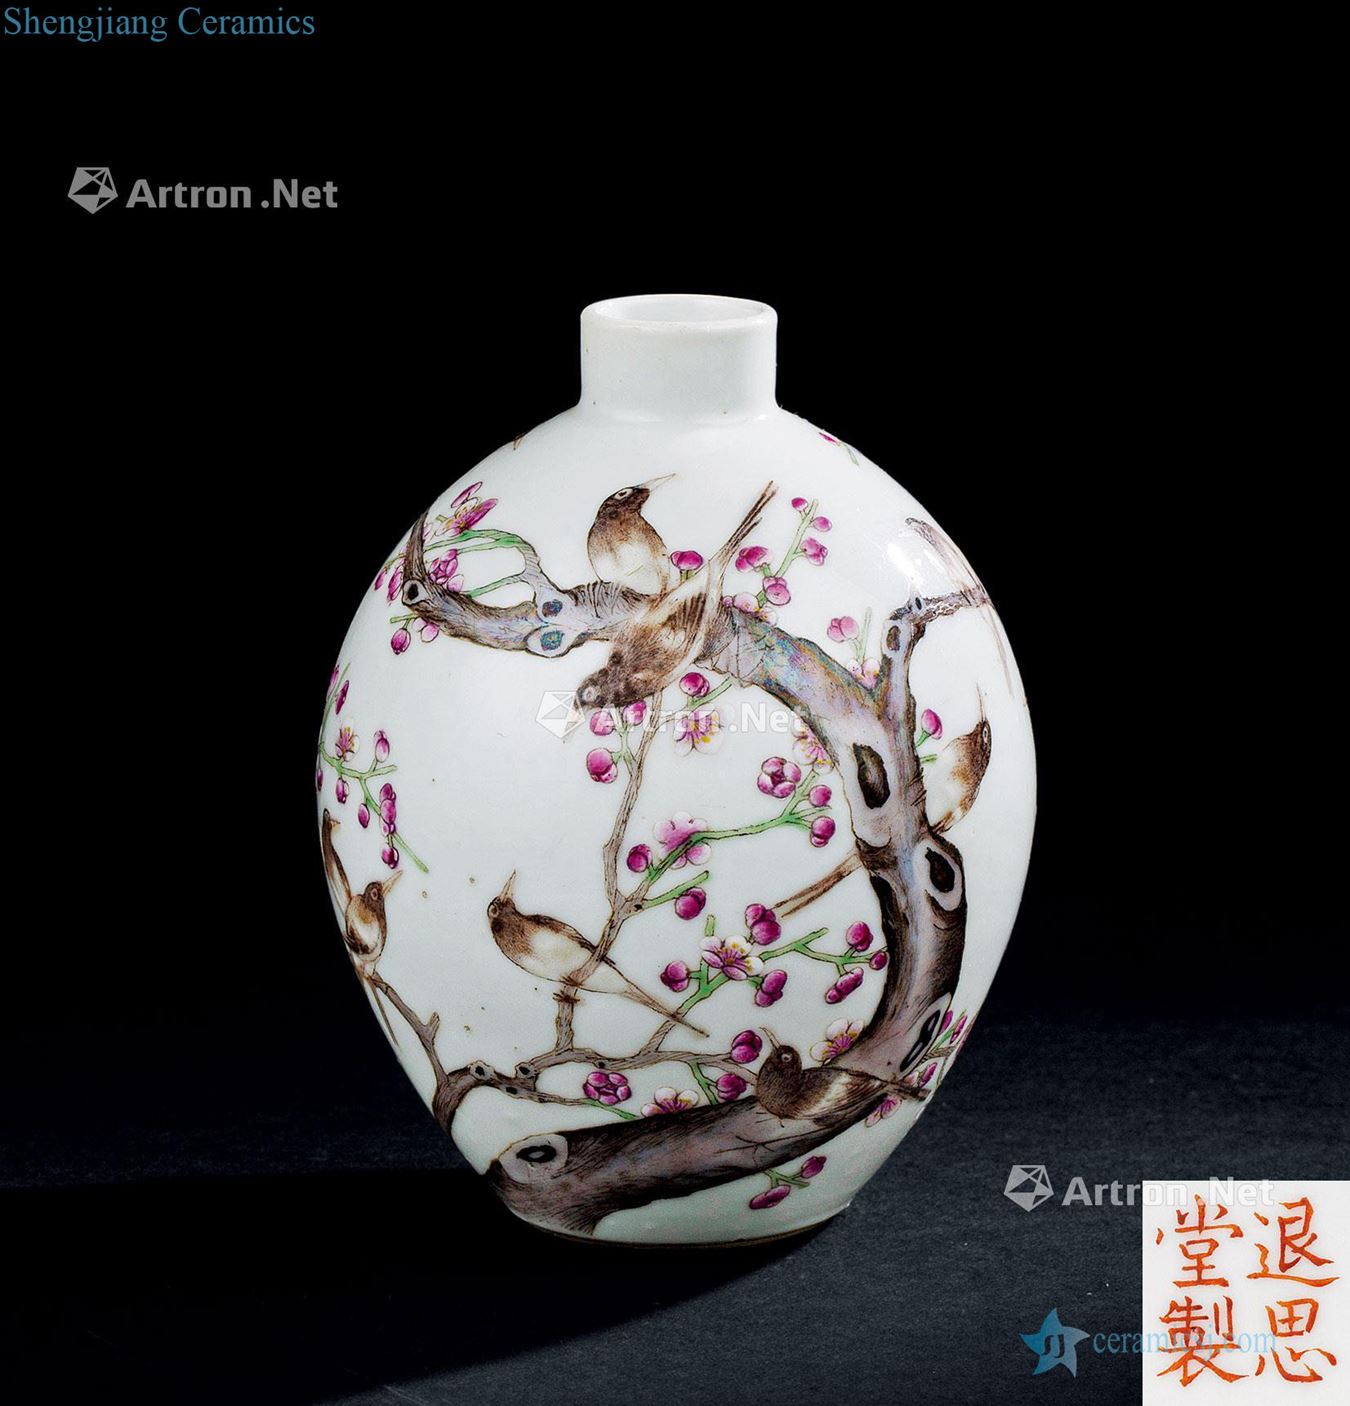 In the qing dynasty (1644-1911), pastel beaming receptacle